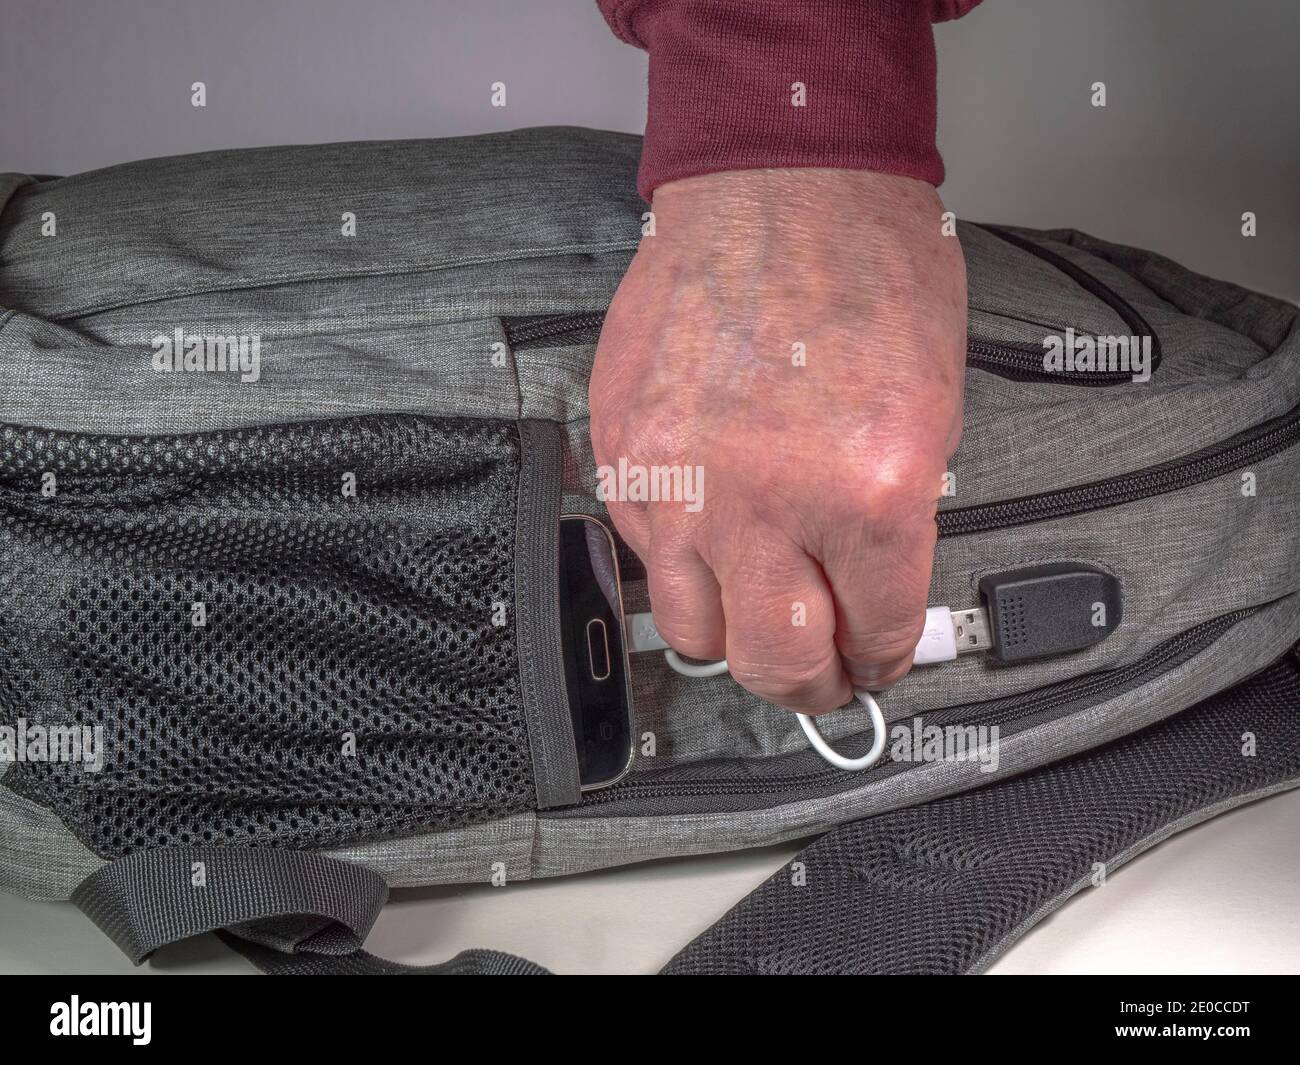 Man's hand connecting a cord / cable between a mobile phone in a pocket on  a rucksack / backpack, and a USB battery charger port fitted into the bag  Stock Photo - Alamy